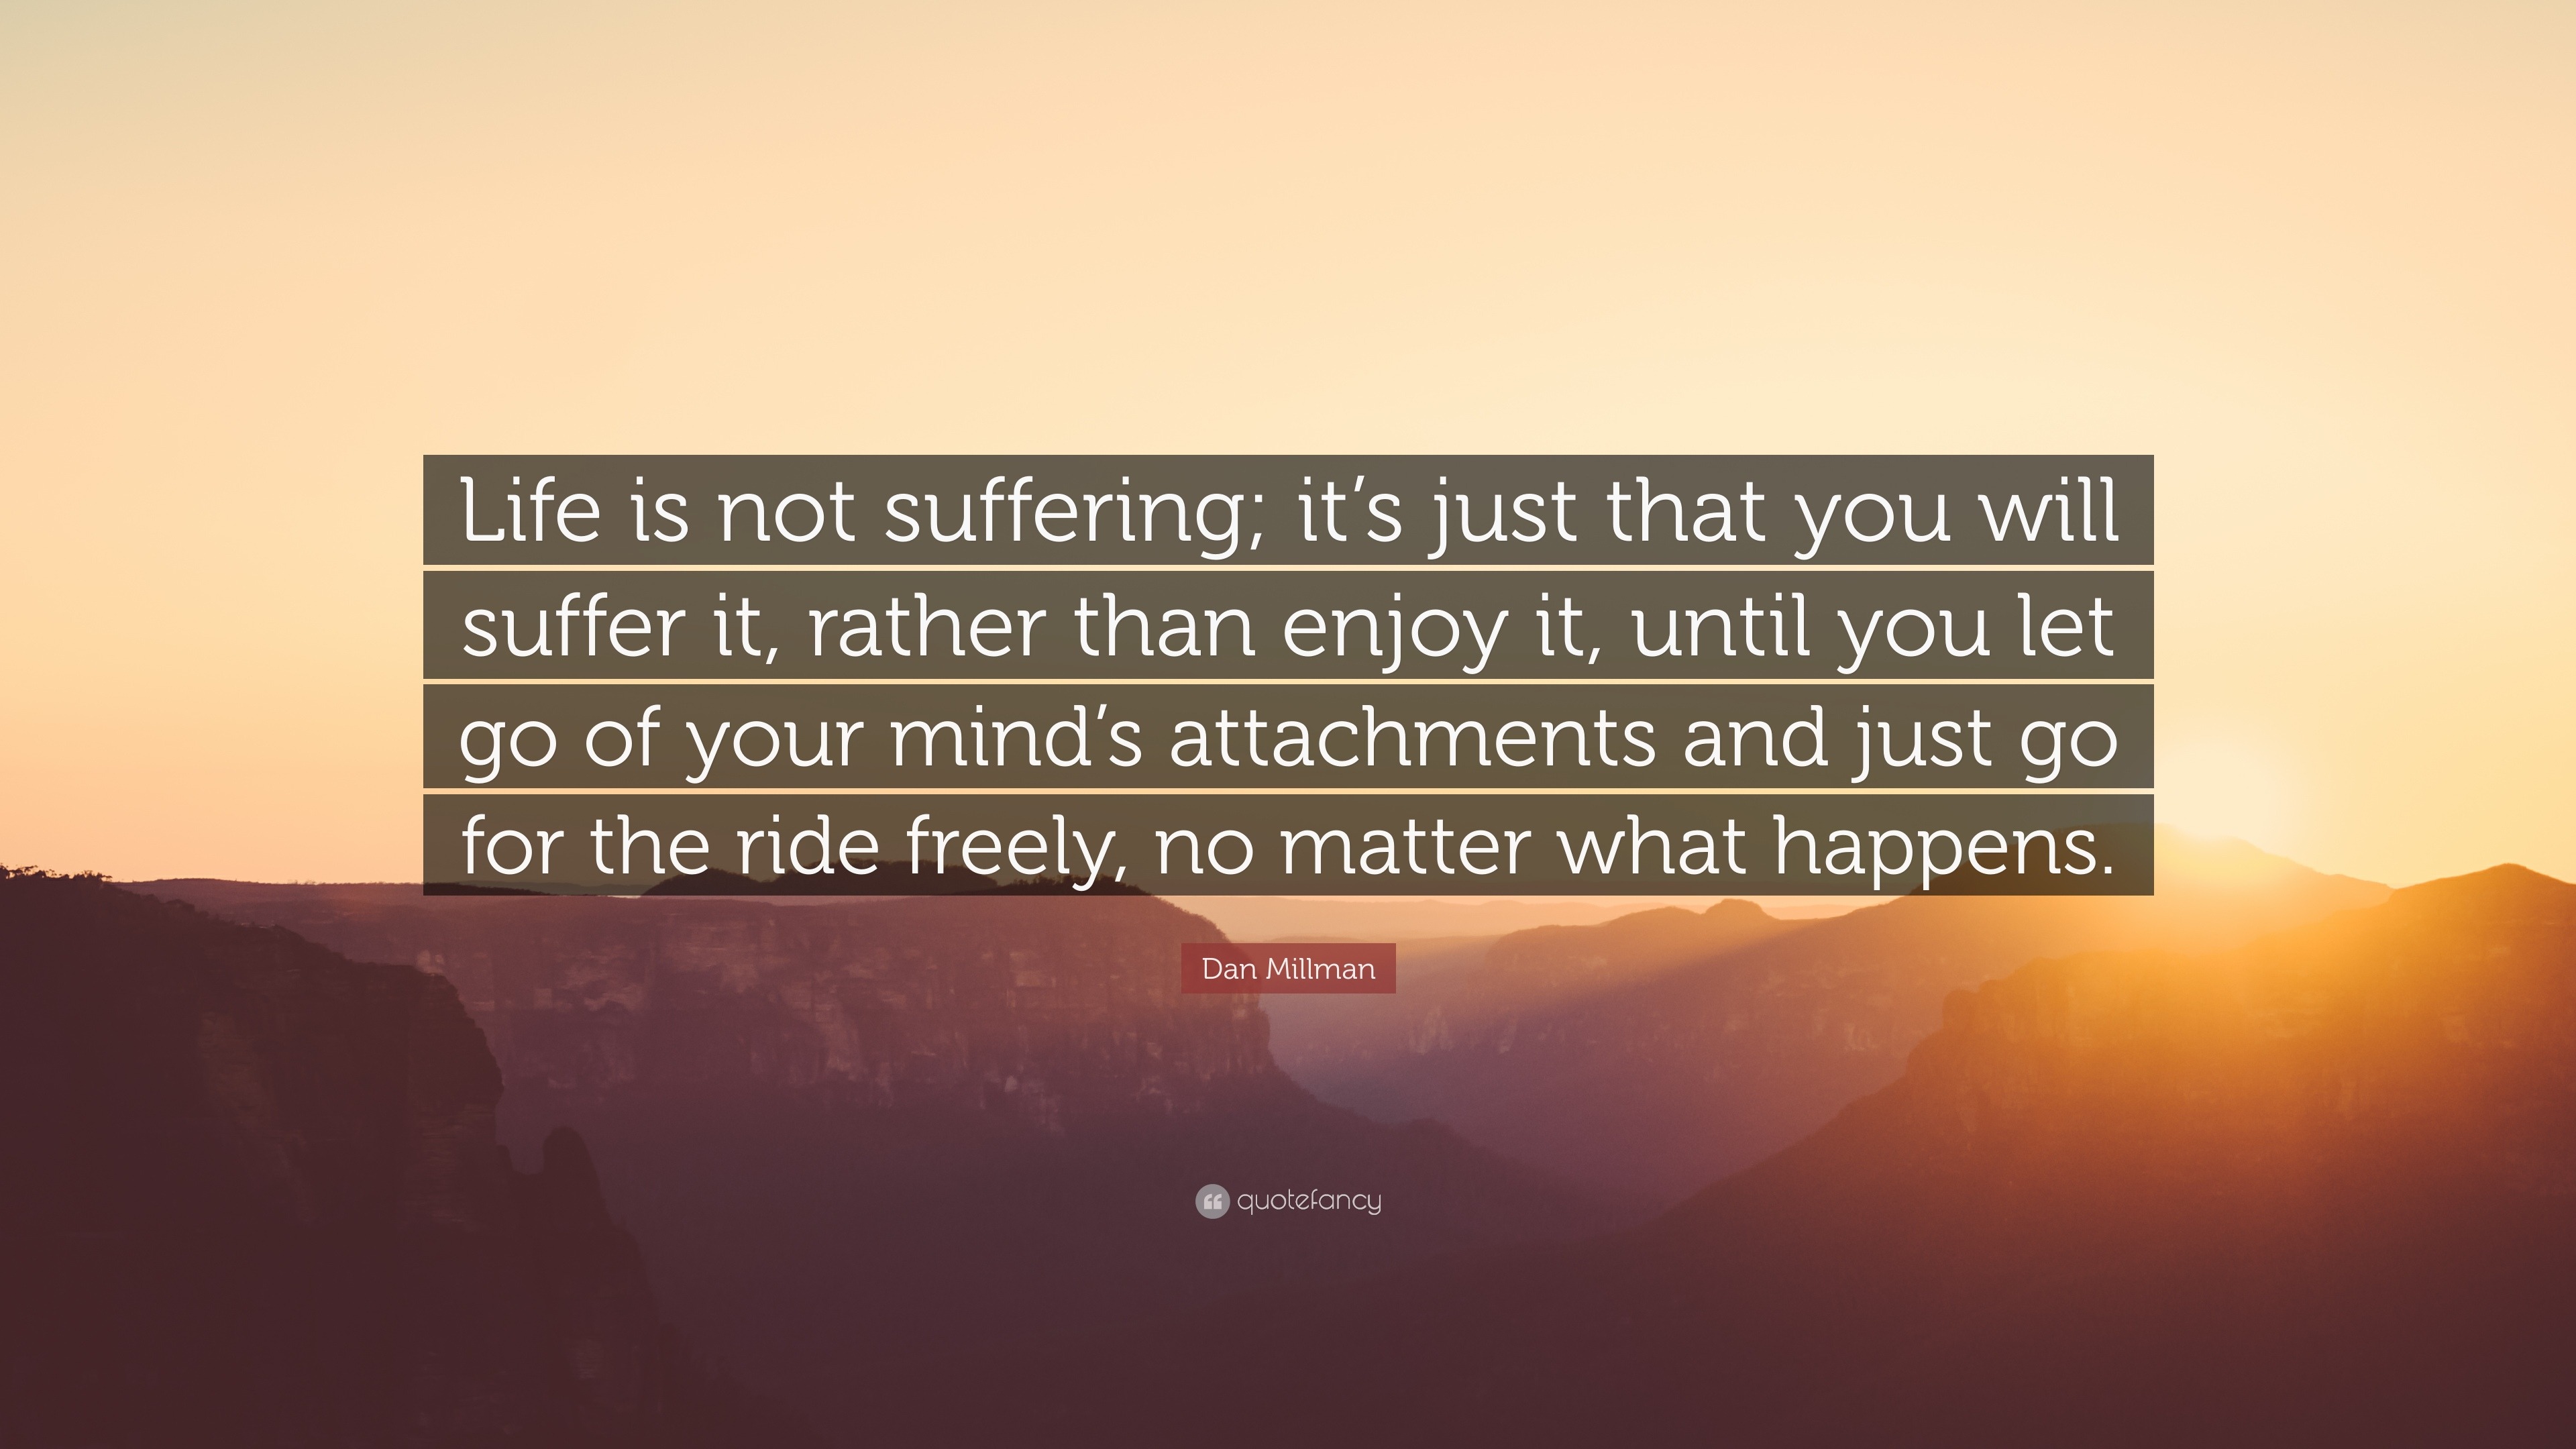 Dan Millman Quote “Life is not suffering it s just that you will suffer